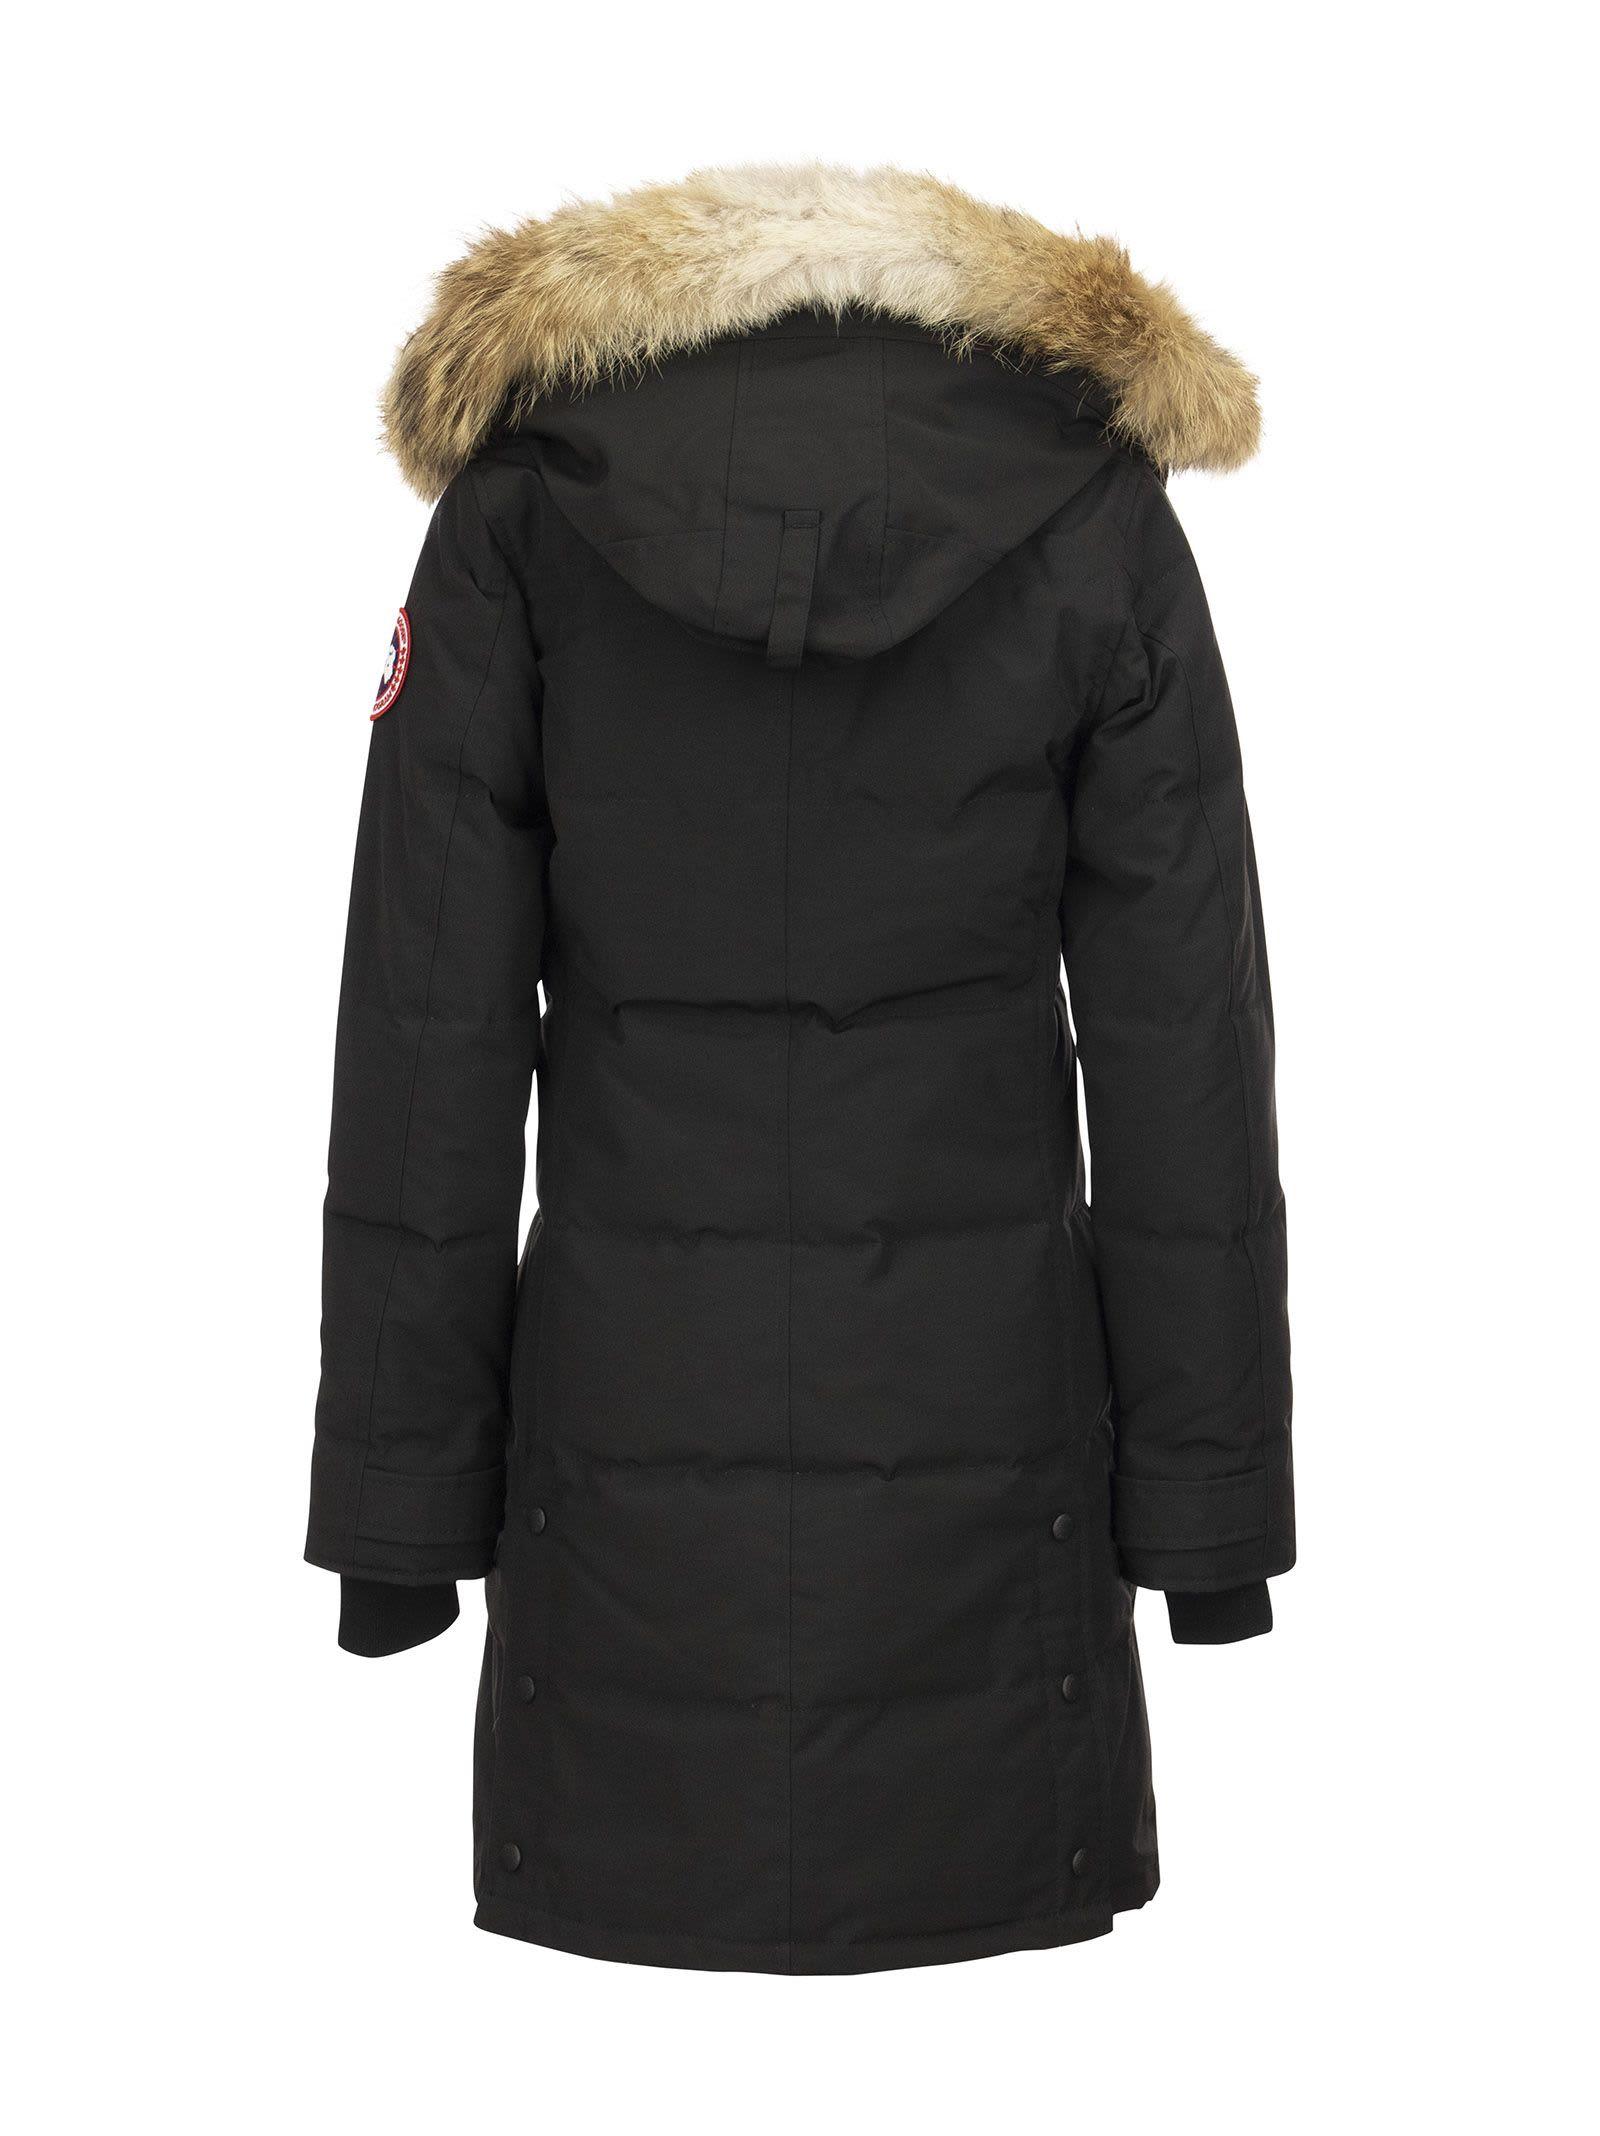 Canada Goose Shelburne - Fusion Fit Parka in Black | Lyst